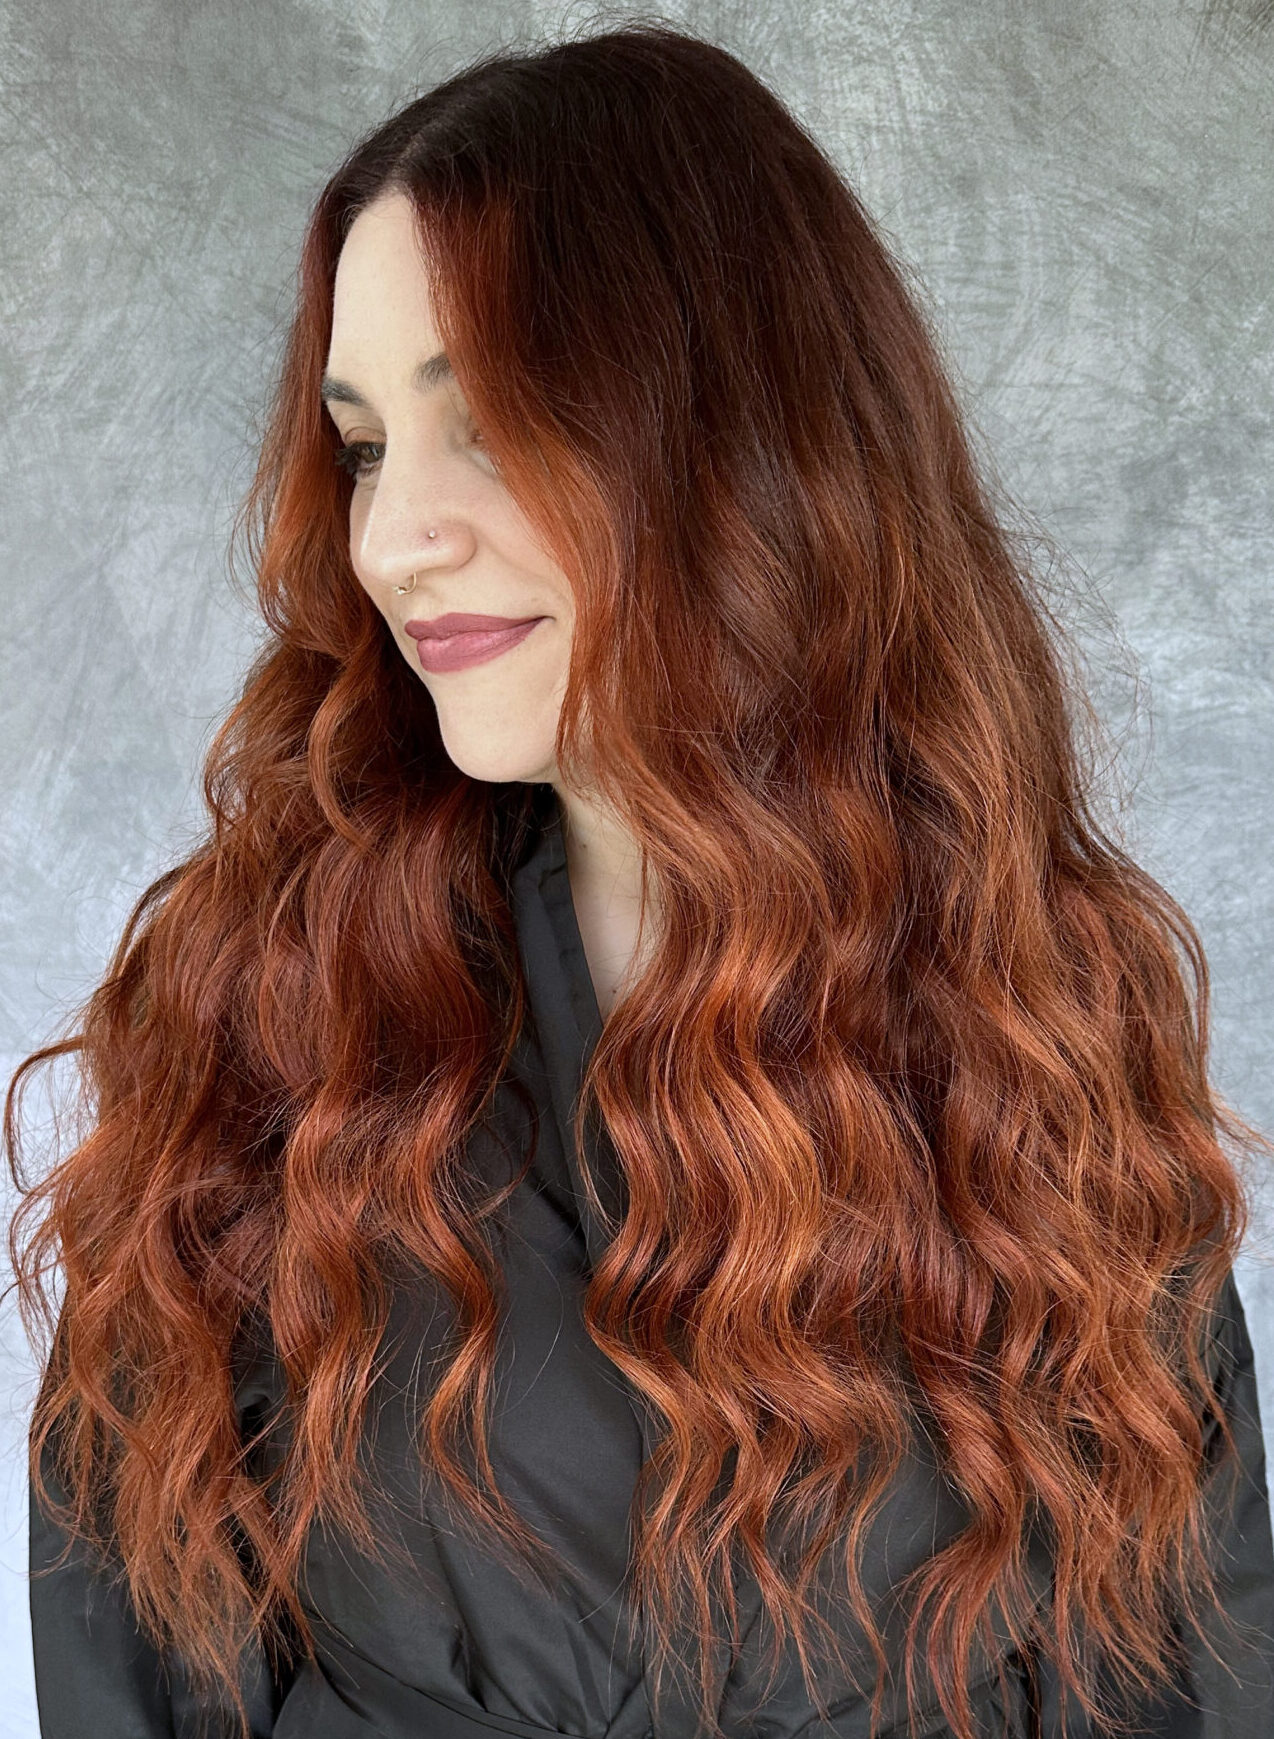 Natura Beaded Rows: Confidence-boosting hair extensions for Antioch, Brentwood, and Oakley. Schedule your consultation today.